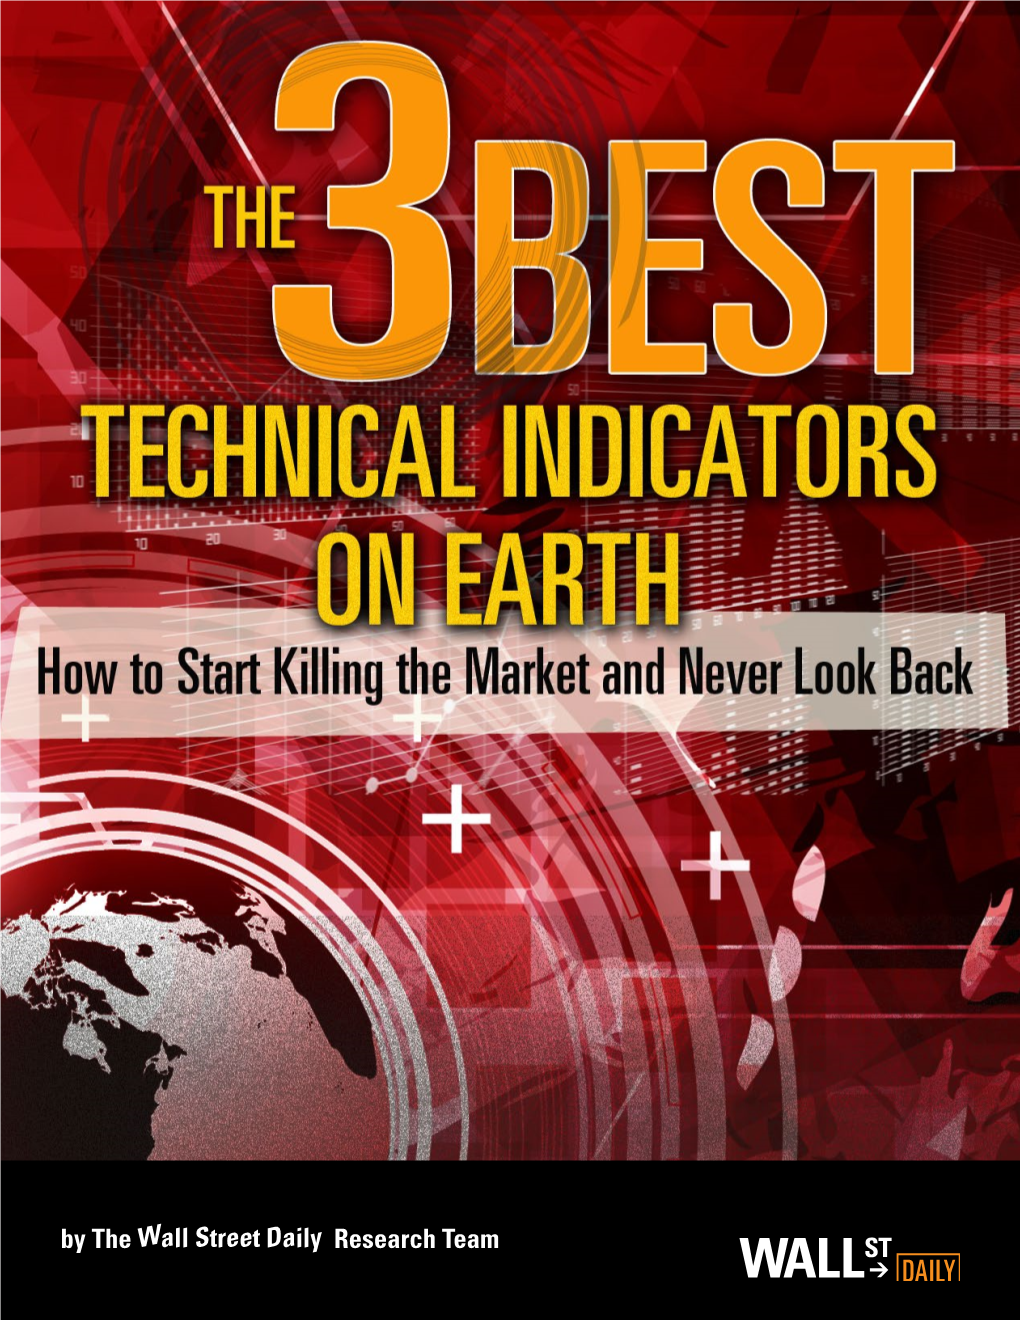 By the Wall Street Daily Research Team the 3 BEST TECHNICAL INDICATORS on EARTH